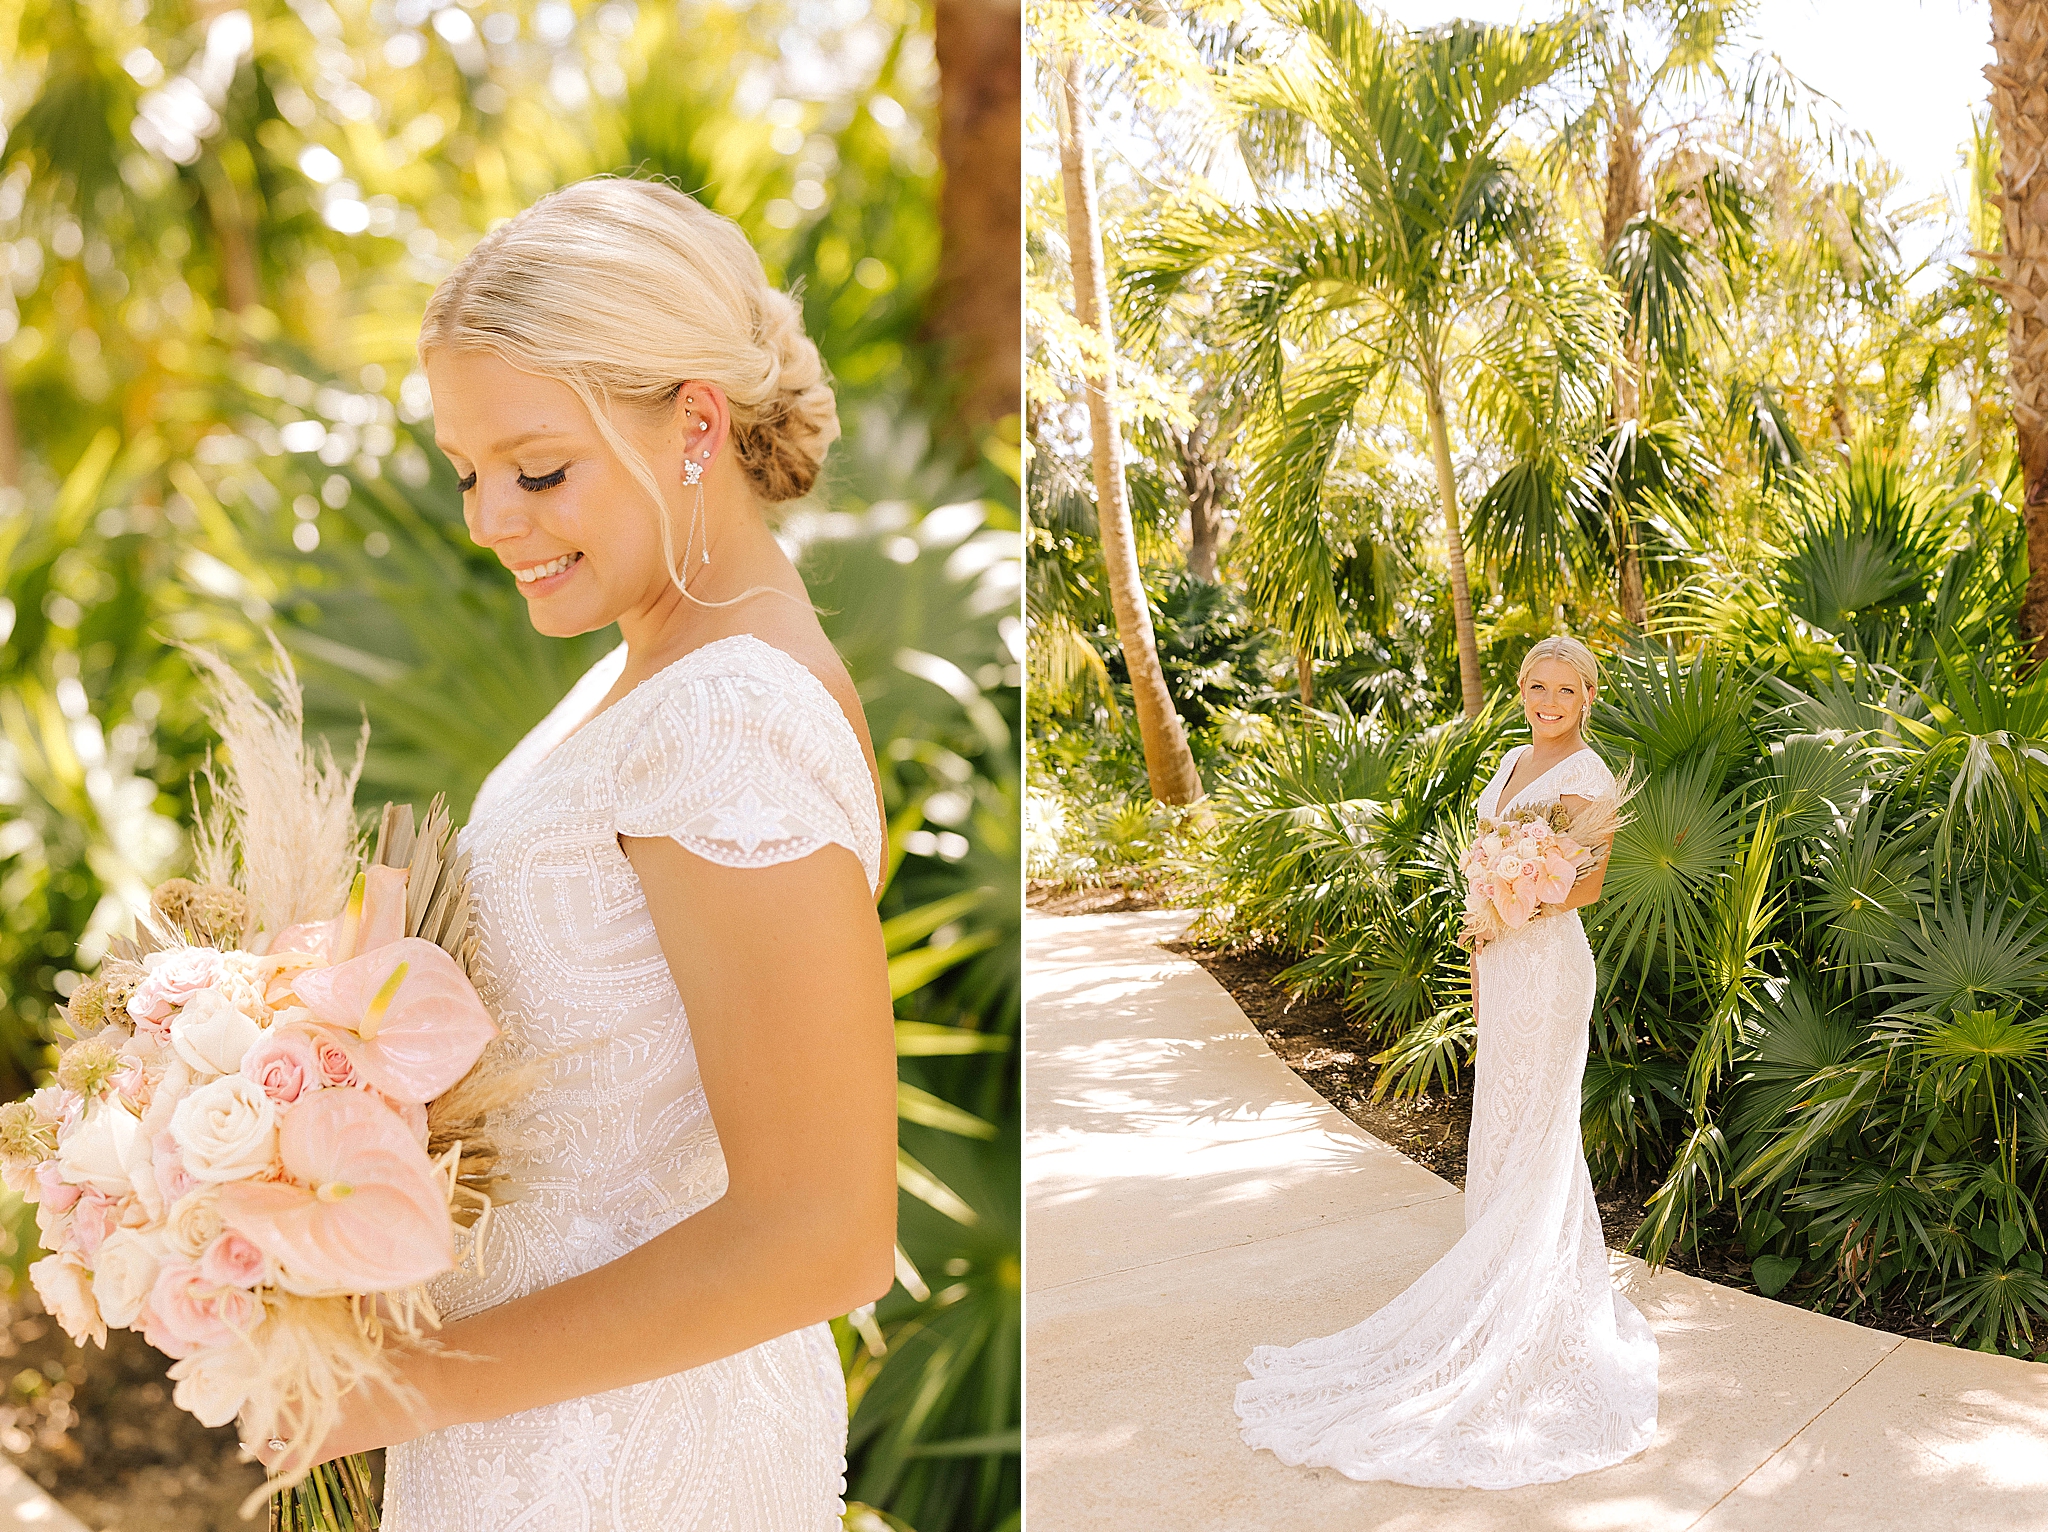 Playa Del Carmen bridal portraits on pathway with palm trees